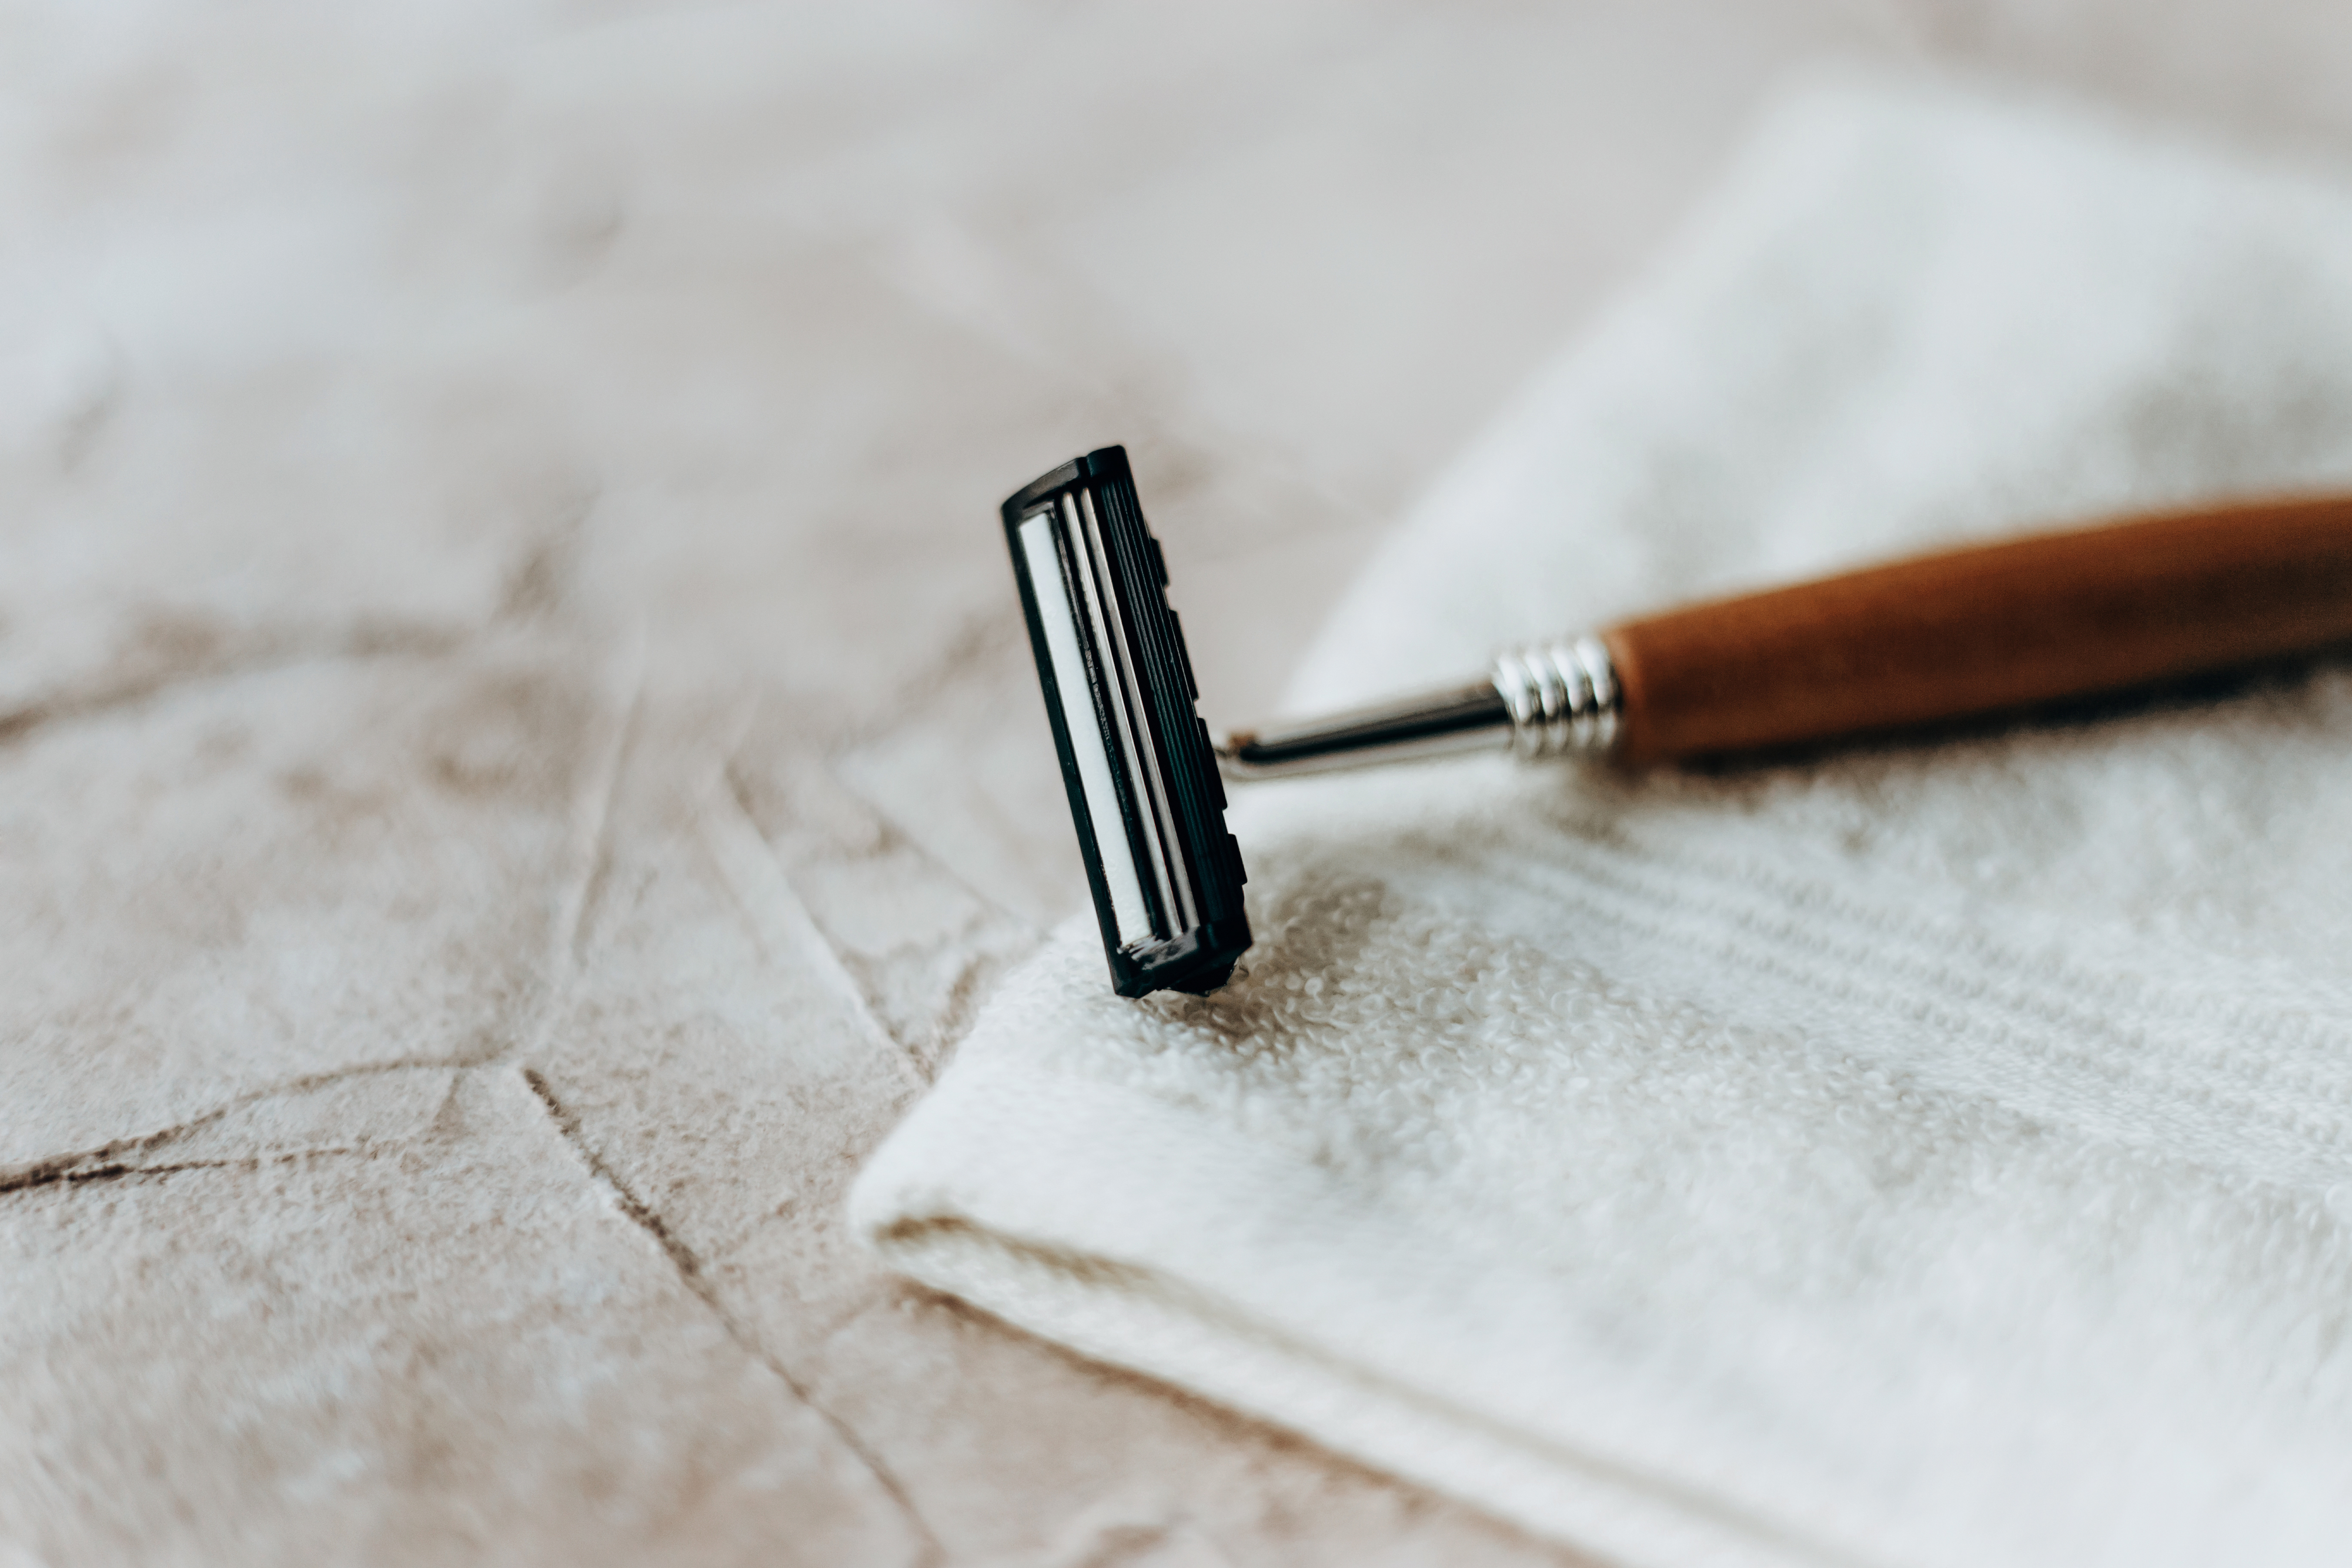 Razor with a wooden handle on a textured surface